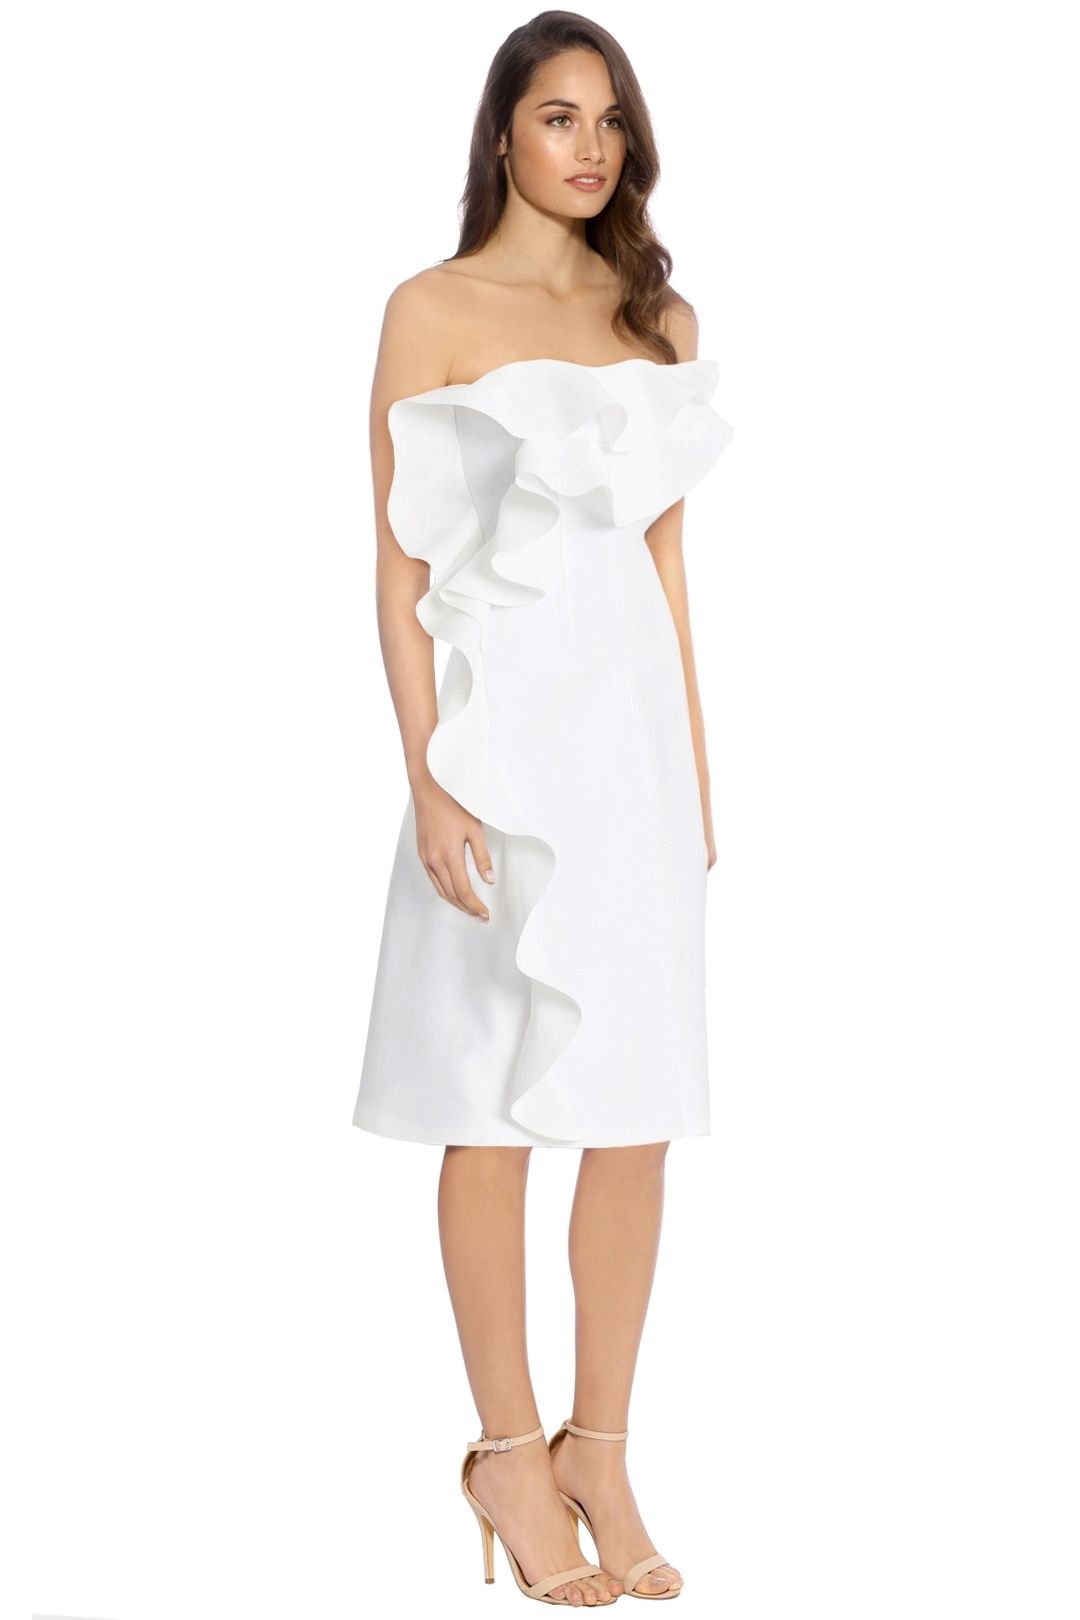 By Johnny - Tess Angel Strapless Dress - White - Side